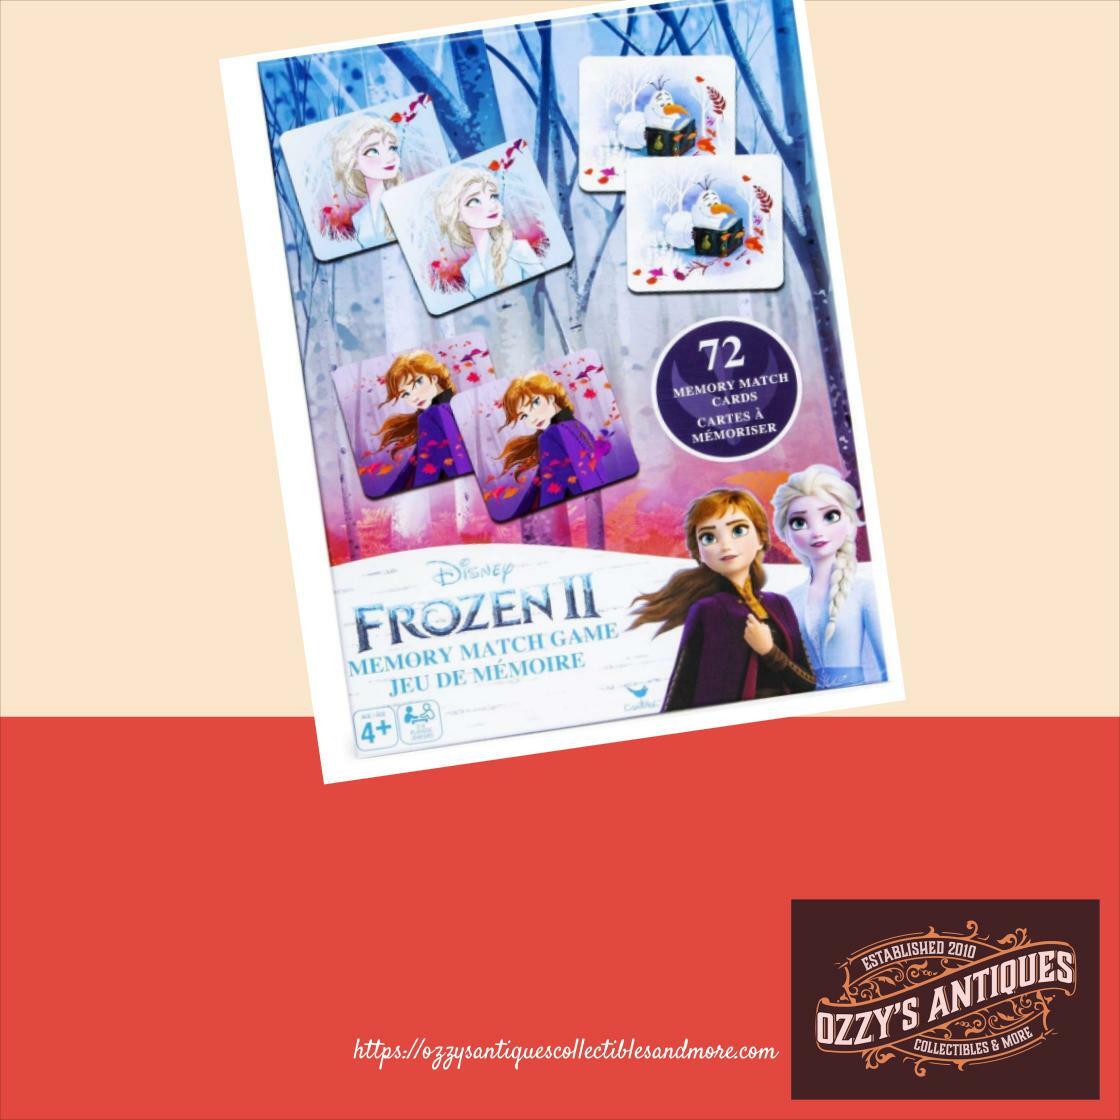 Limited offer! This awesome Disney Frozen II Memory Match Game for $8.99.. 
https://t.co/iRBz7K7vzt
#KidsGames #Games https://t.co/EC6AOWjeNg